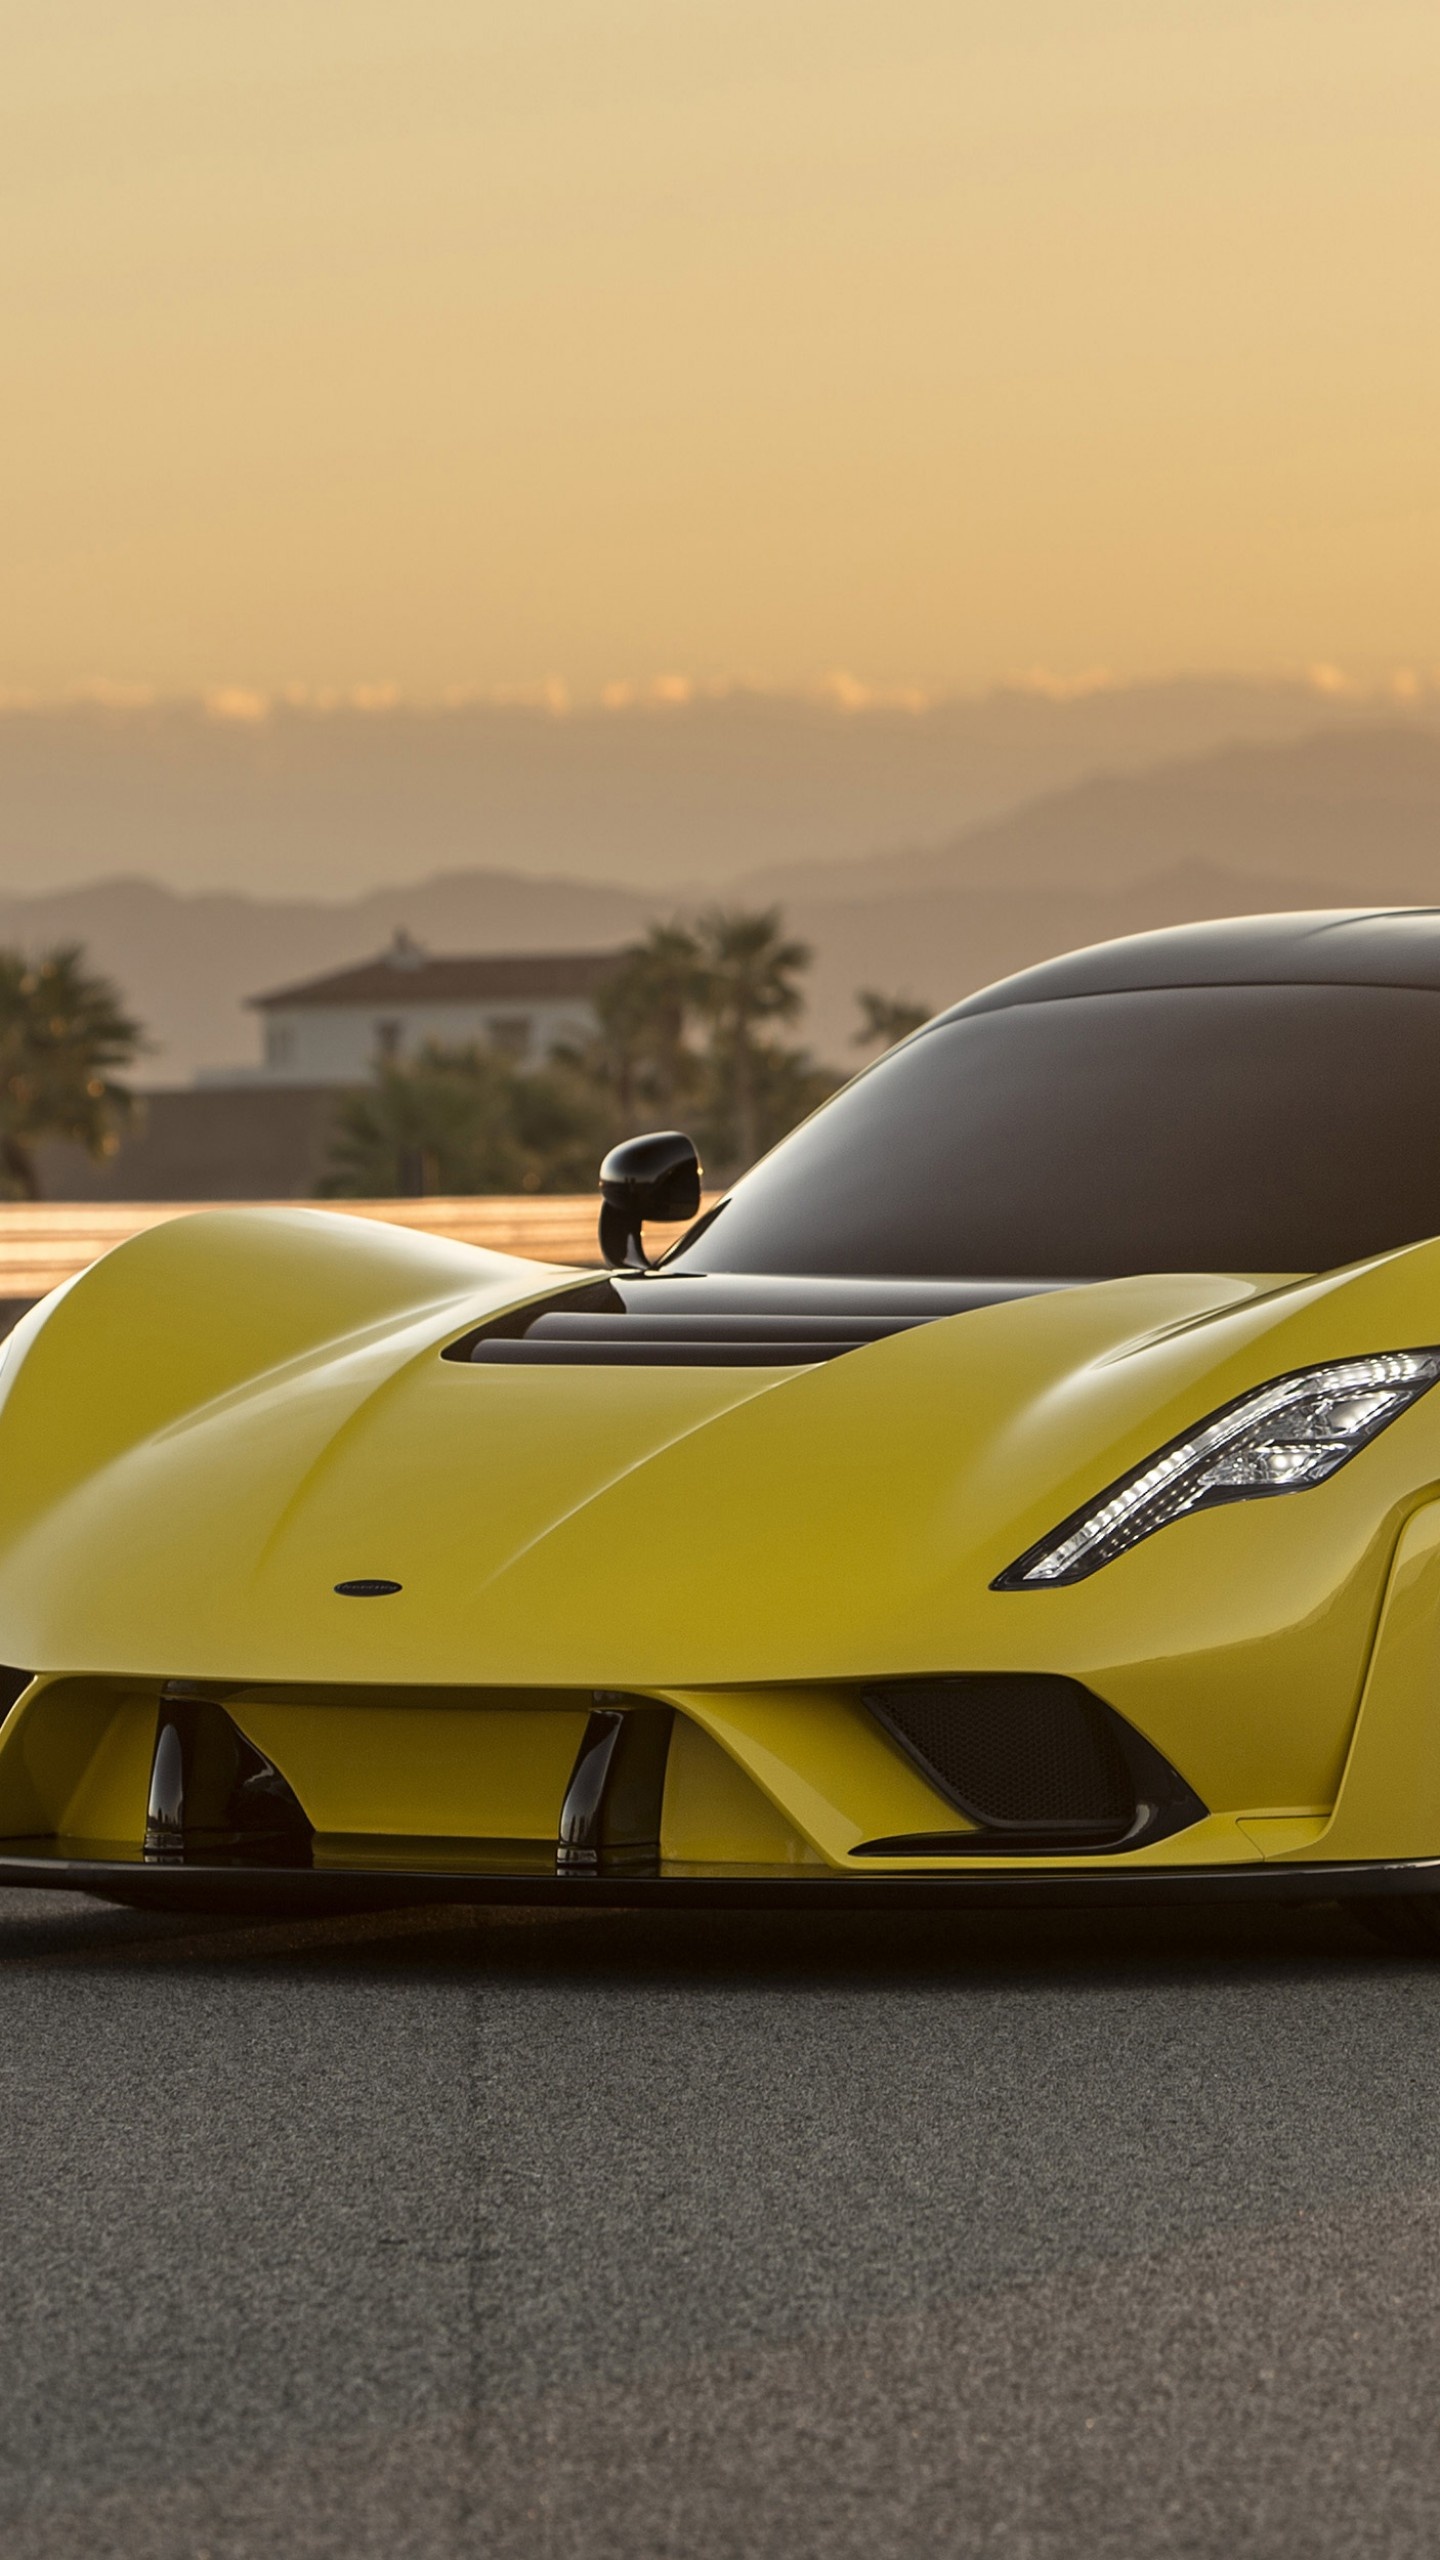 Hennessey Venom, 4k wallpapers, Stunning cars and bikes, Automotive beauty, 1440x2560 HD Handy